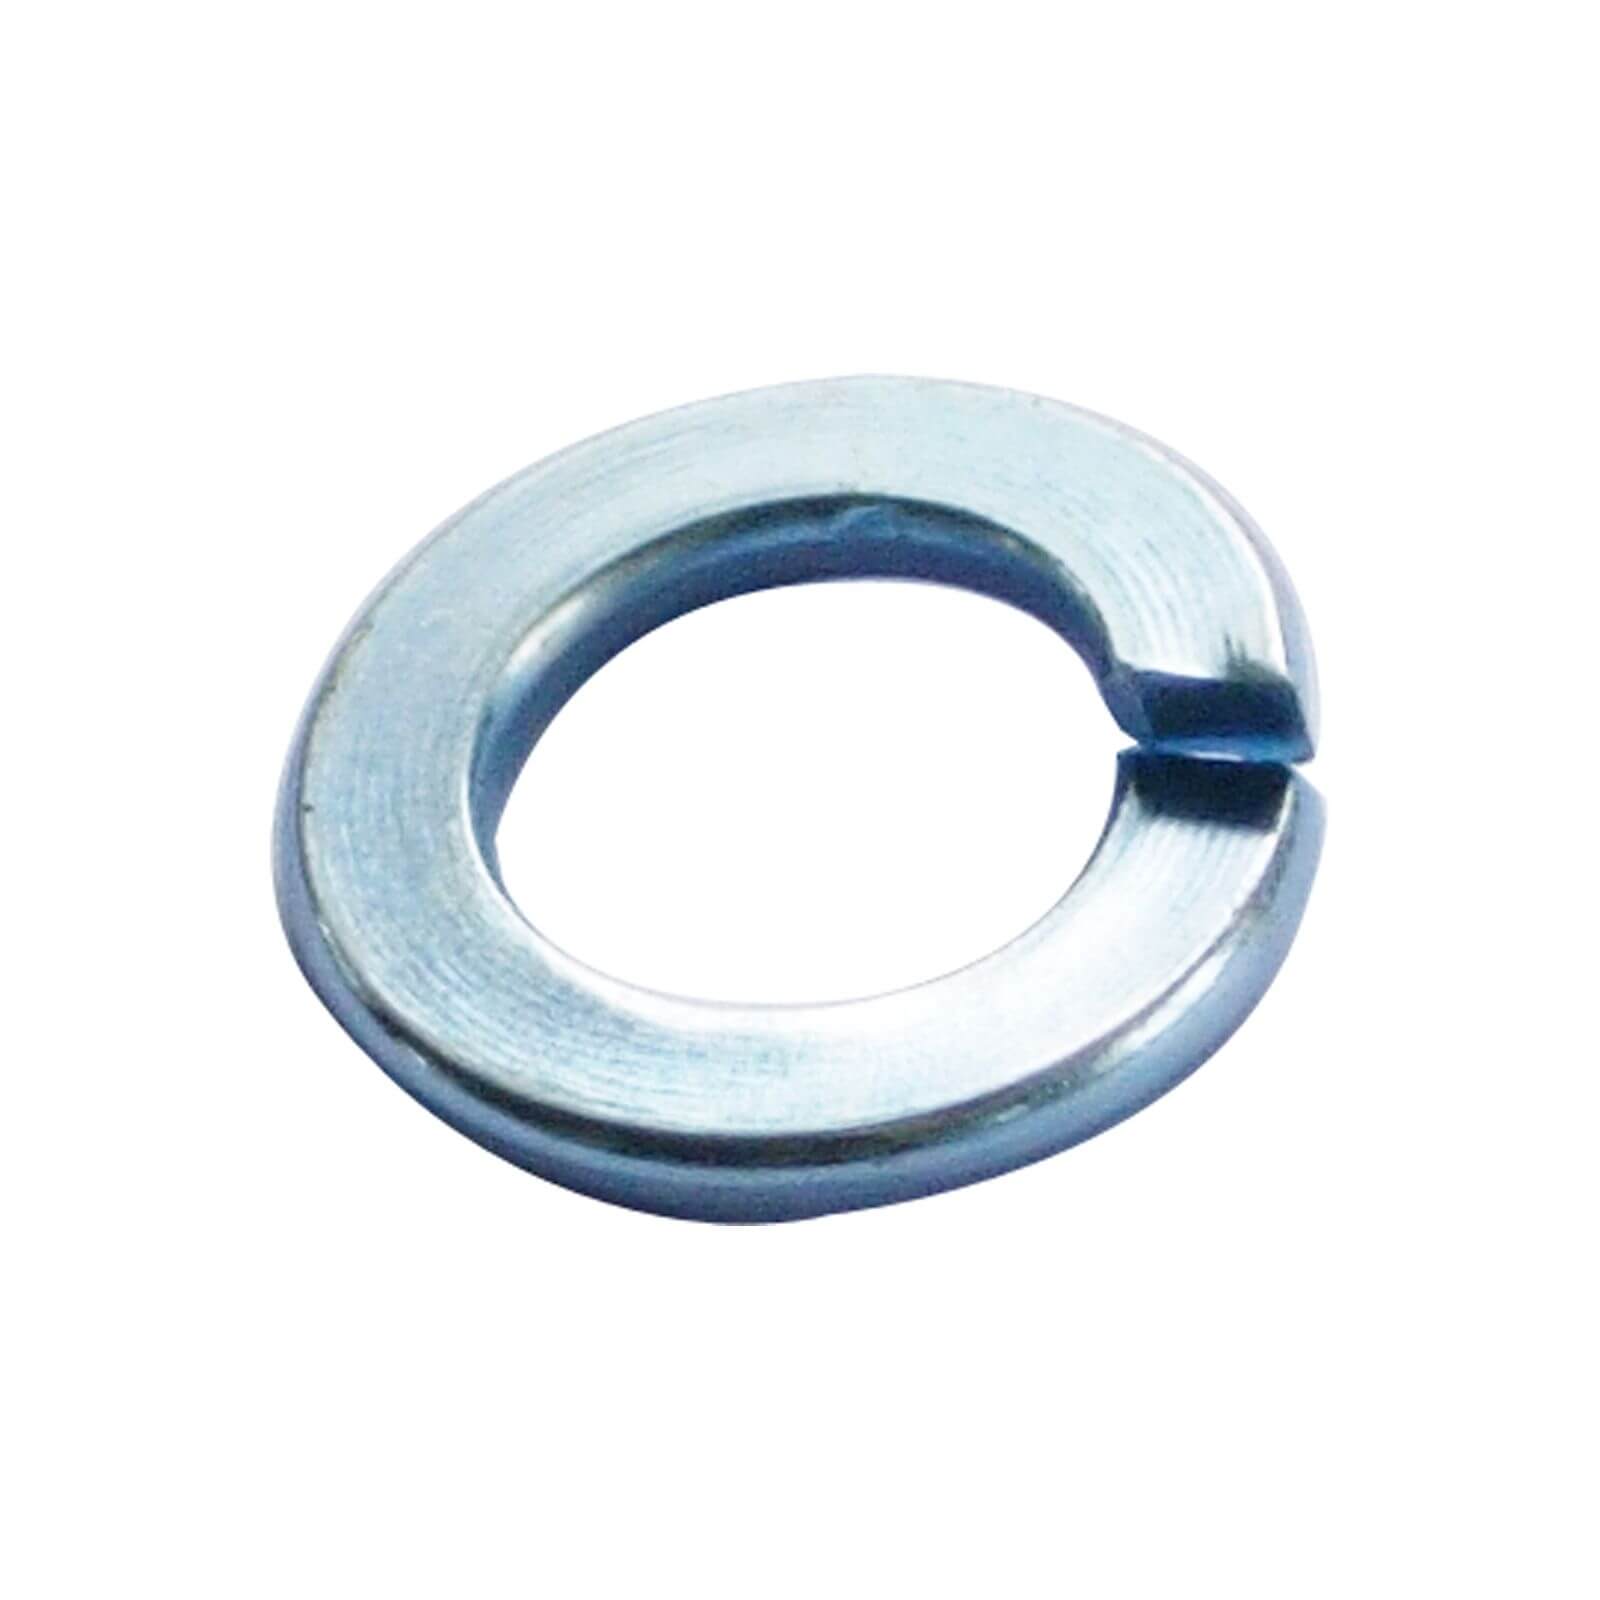 Spring Washer - Bright Zinc Plated - M8 - 25 Pack